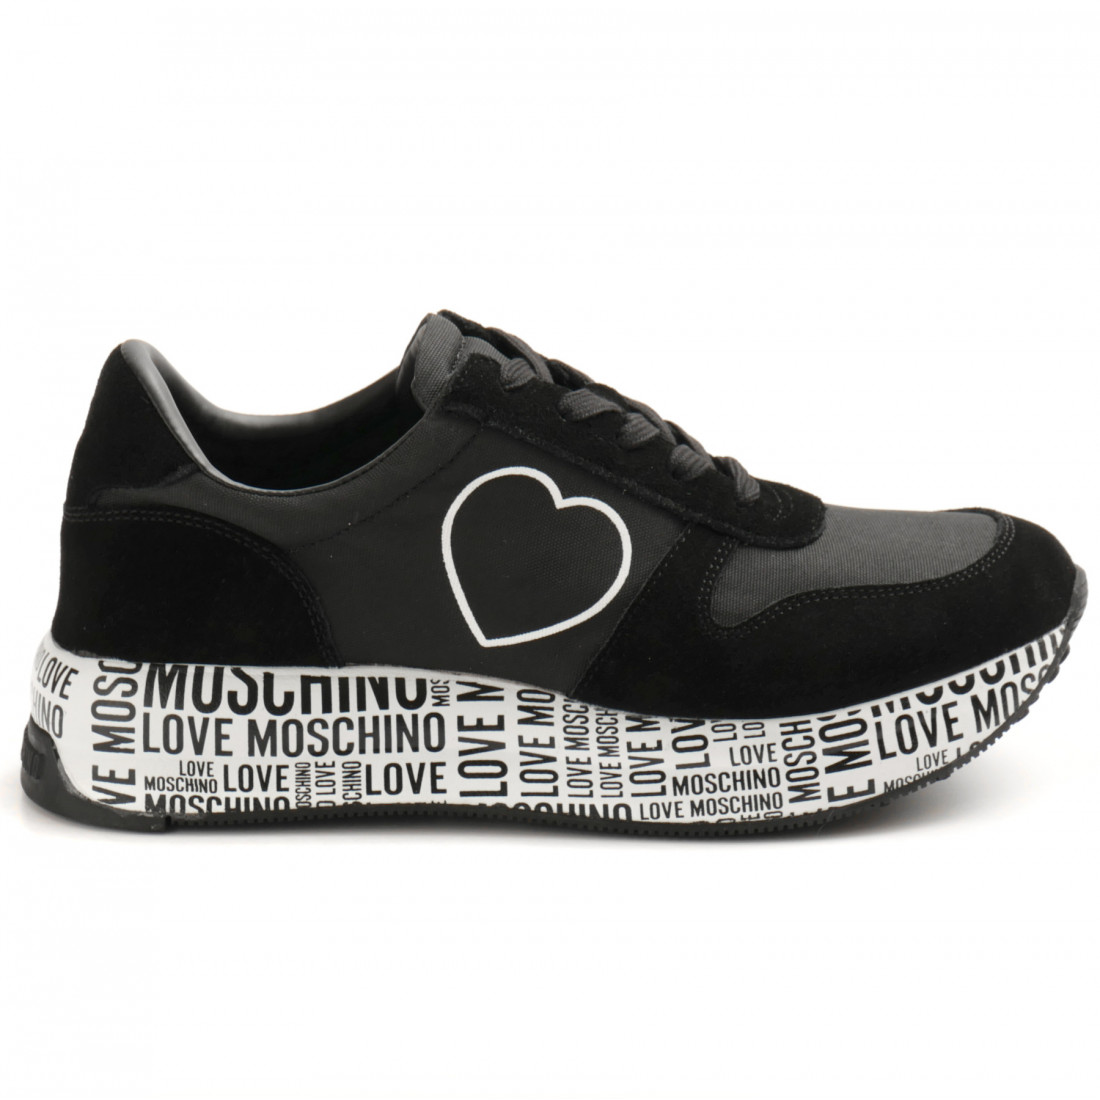 Love Moschino women's sneaker in black suede and fabric